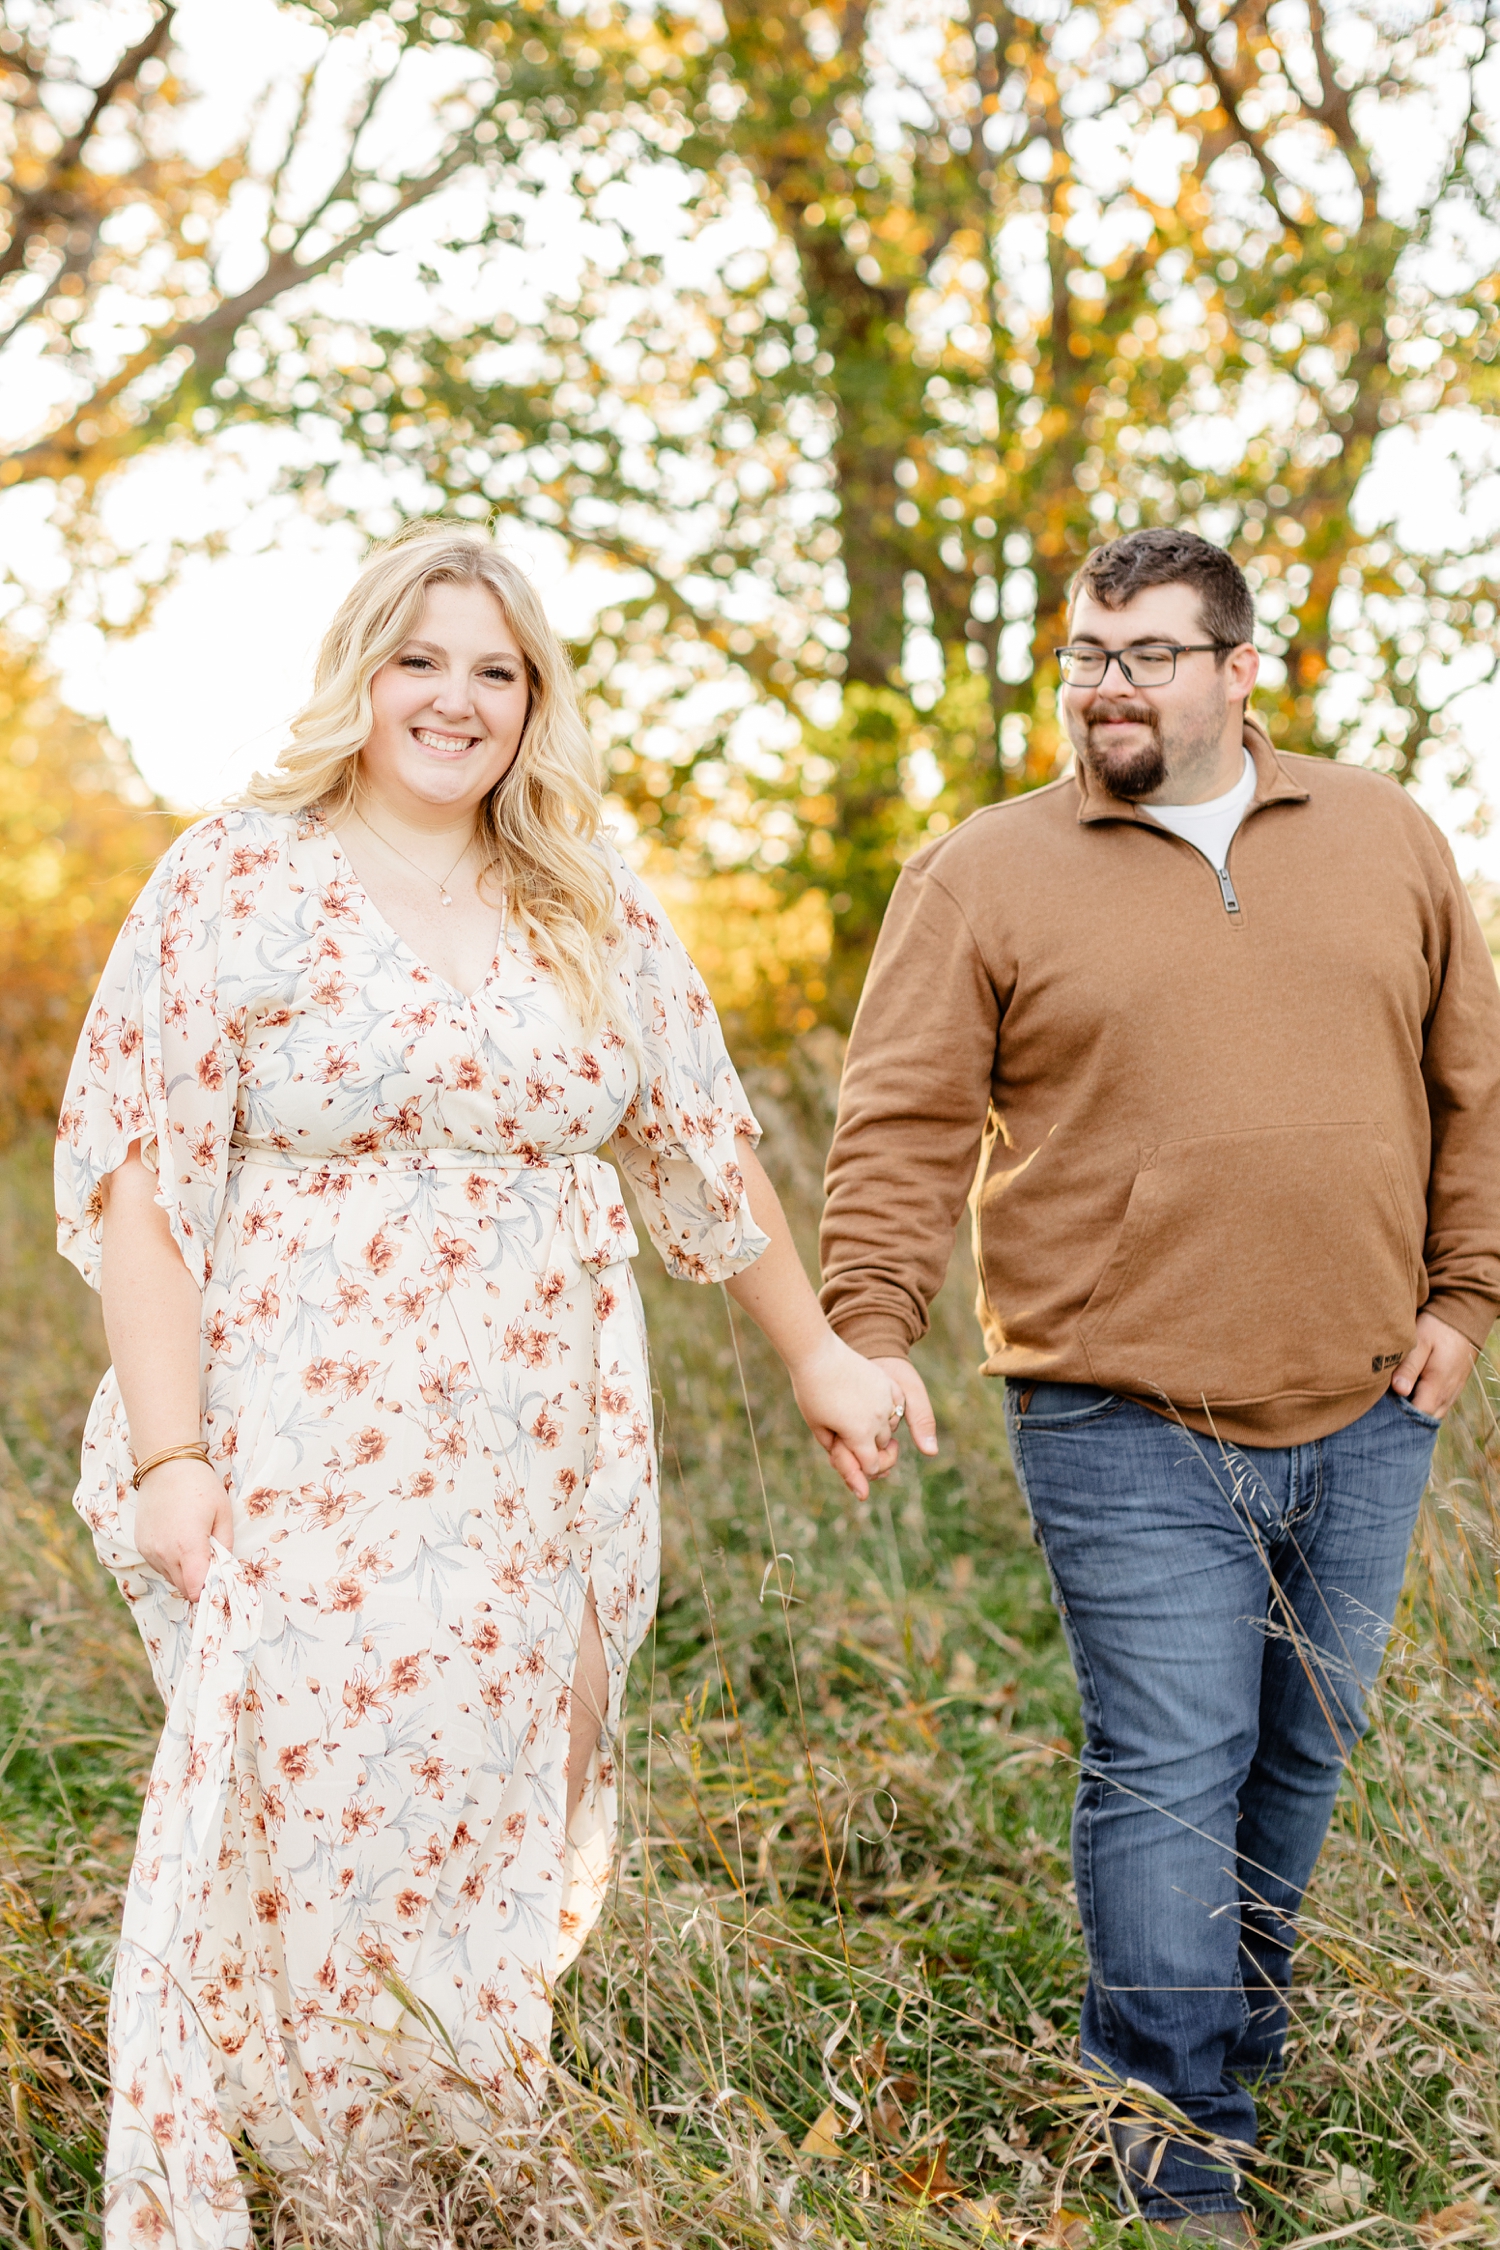 Halie and Nick walk hand in hand in an Iowa grassy pasture with peak fall oak trees in the background | CB Studio